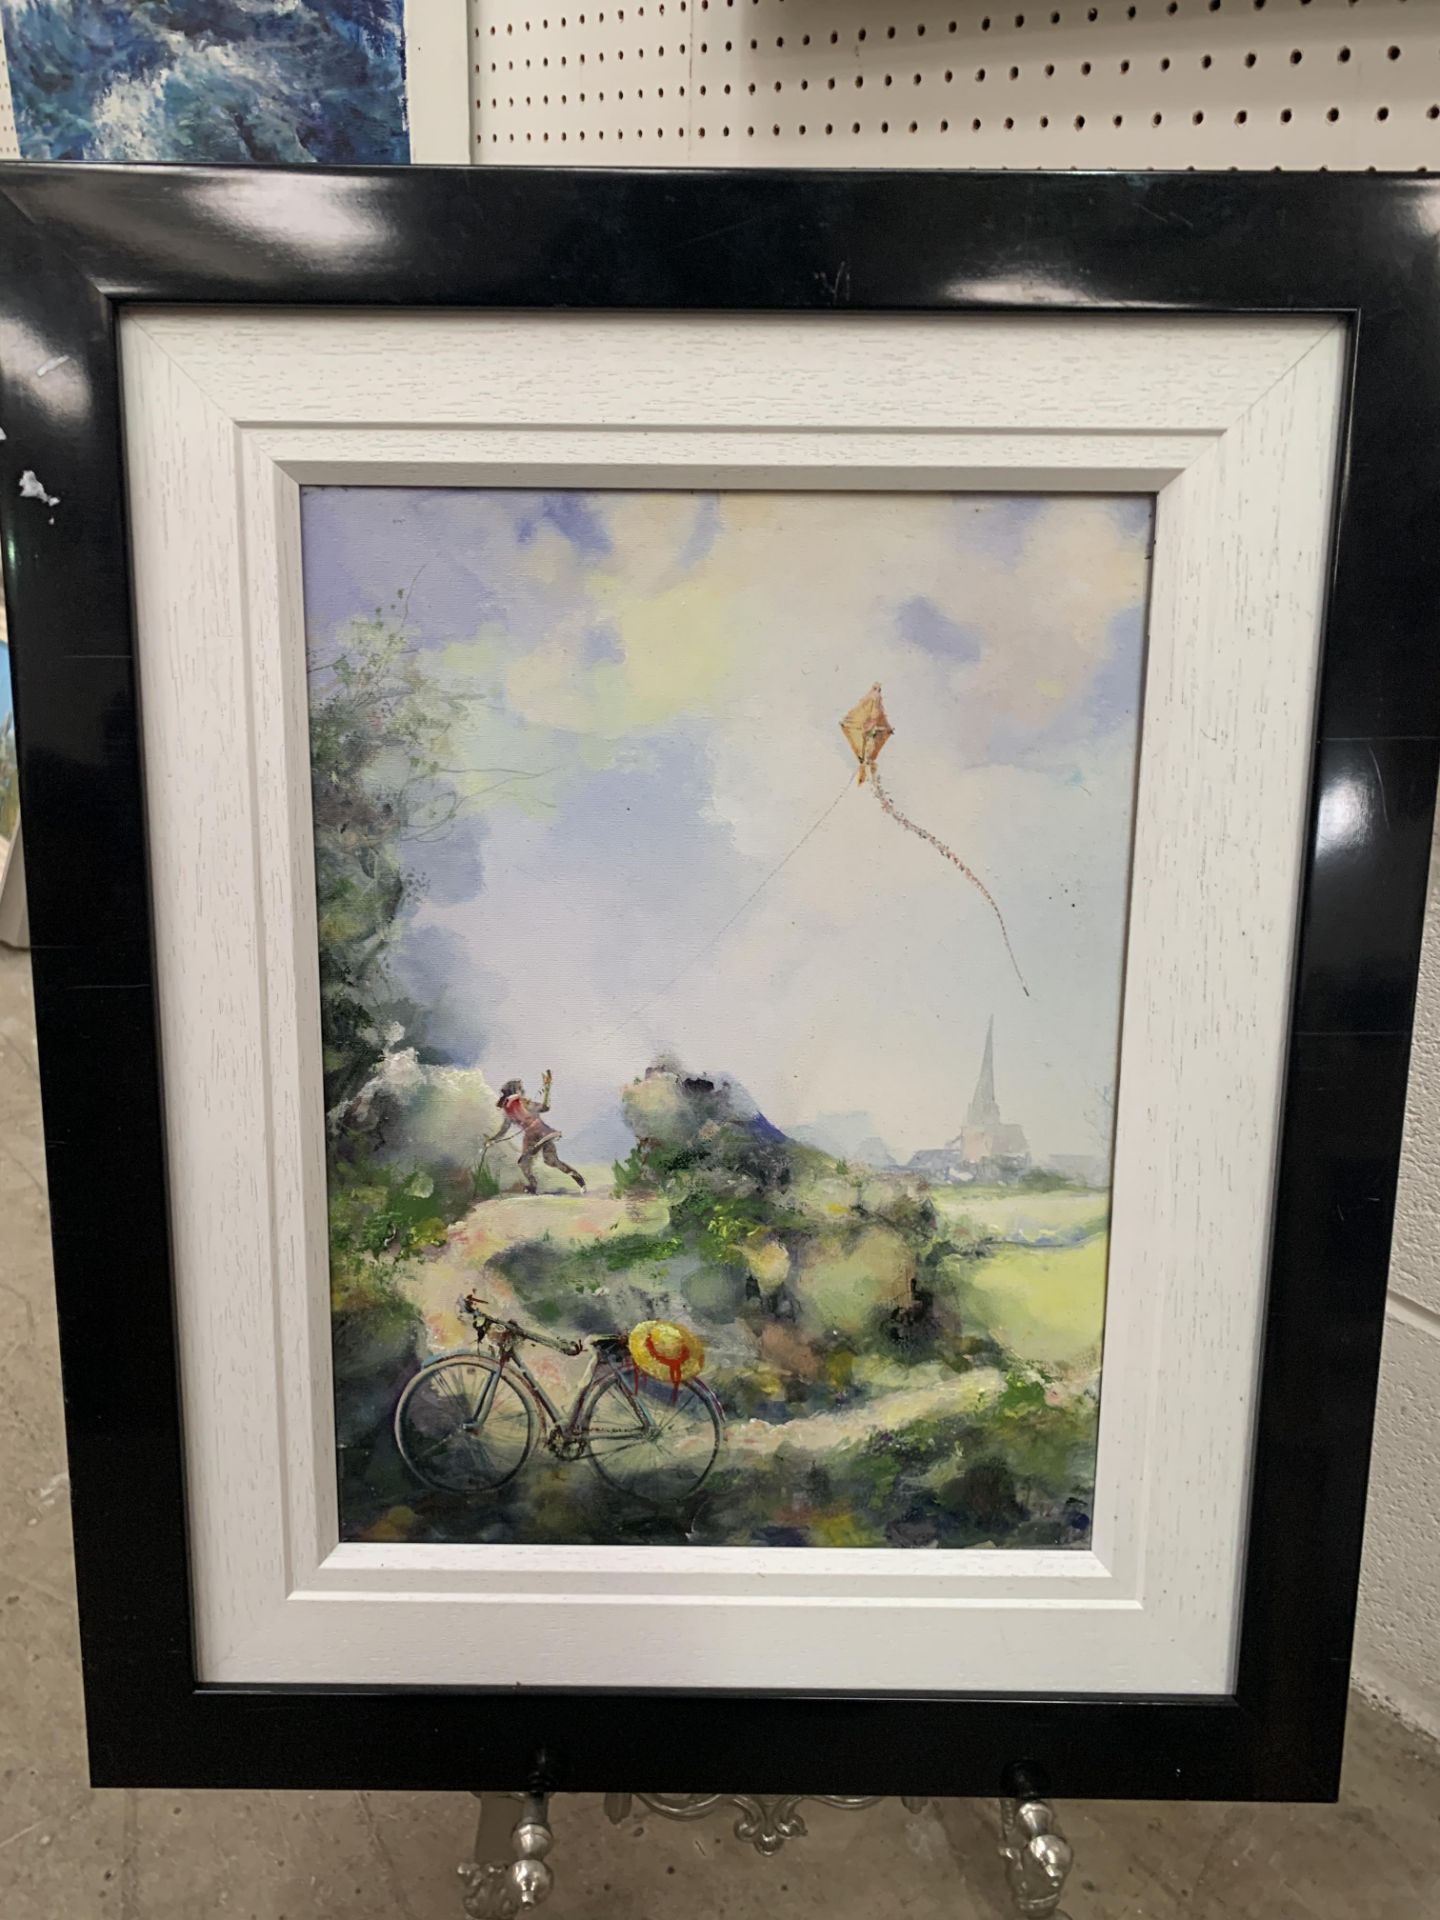 'Child with Kite Scene' Oil Painting by Jorge Aguilar-Agon, RRP £3,995 (19" x 23" including frame) - Image 2 of 3